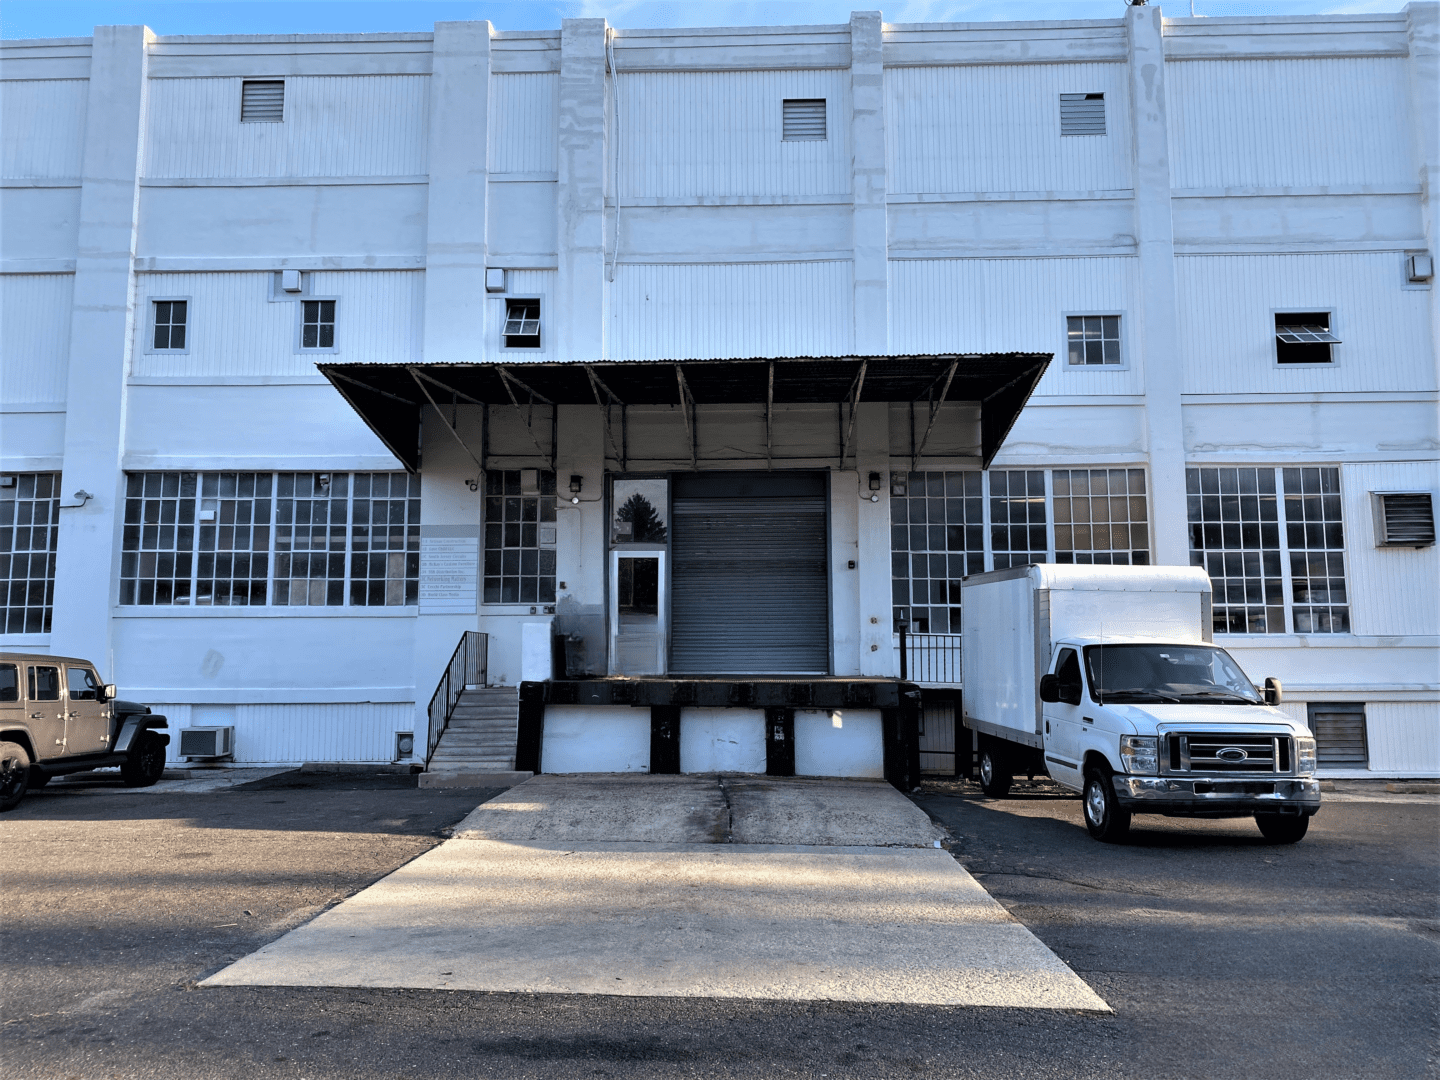 A White Color Truck Placed Outside the Building